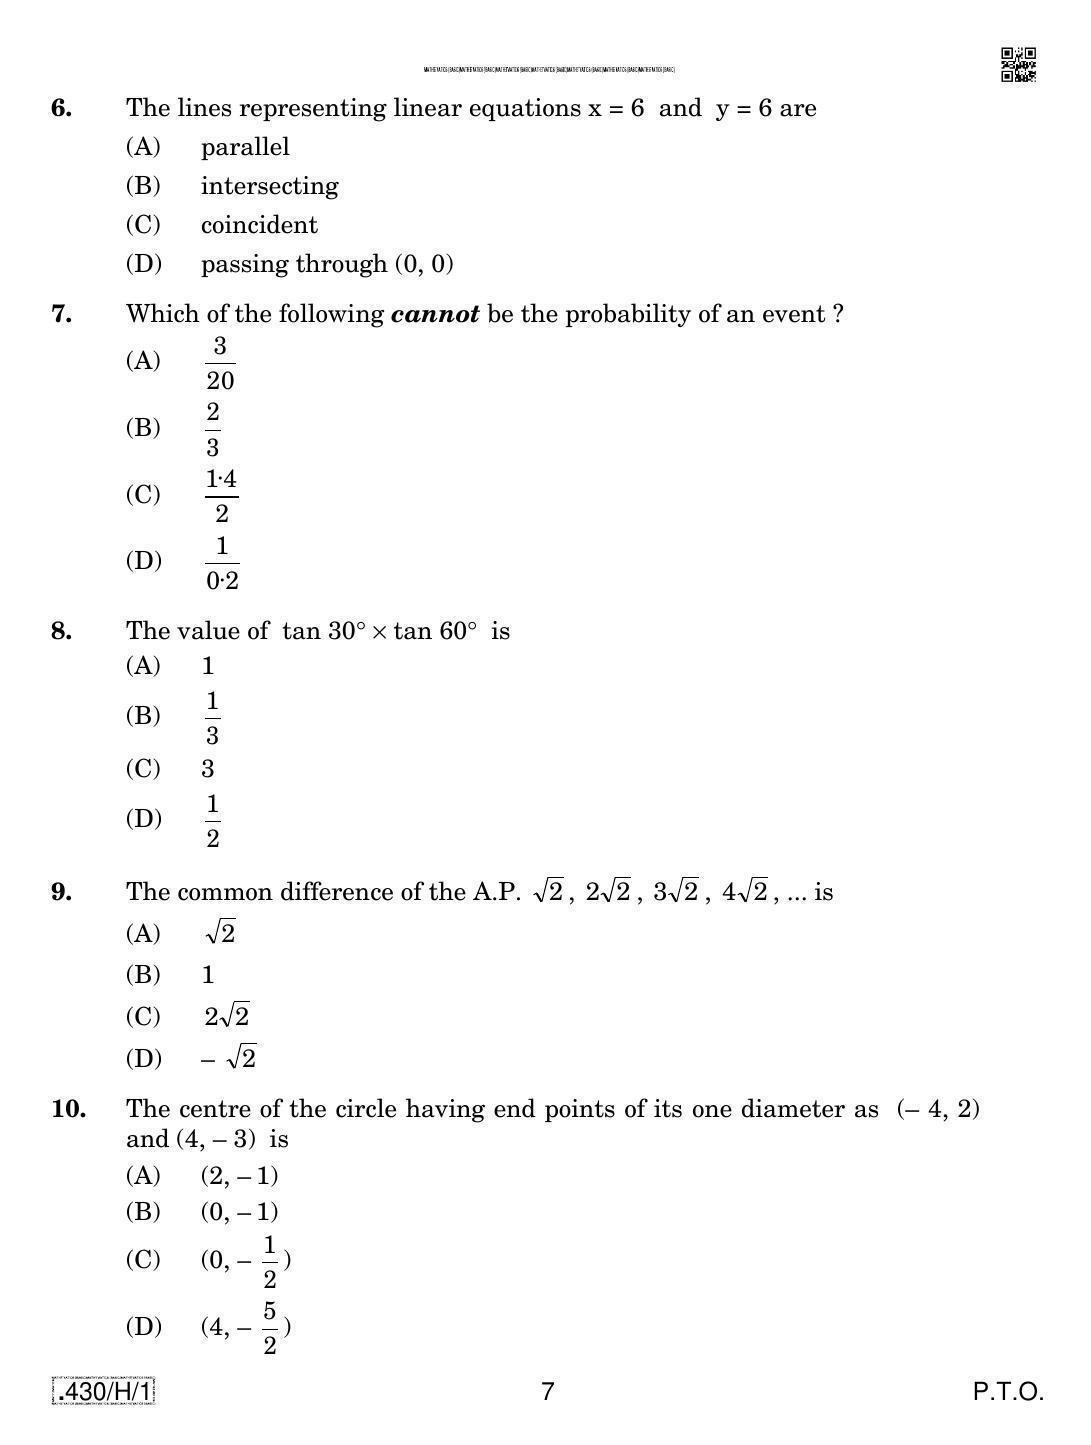 CBSE Class 10 430-C-1 - Maths (Basic) 2020 Compartment Question Paper - Page 7